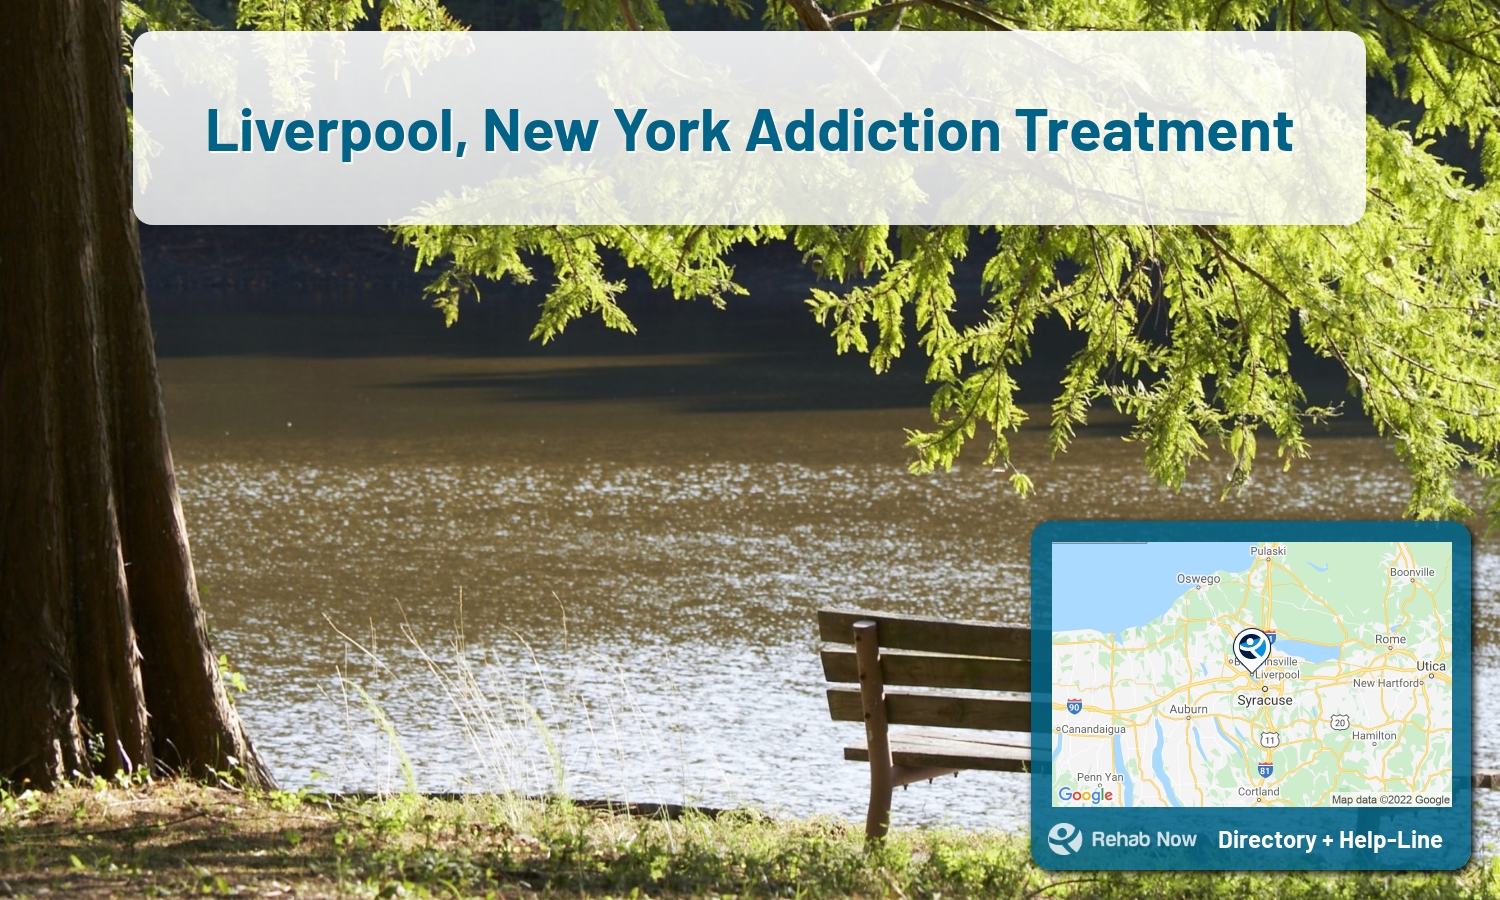 Liverpool, NY Treatment Centers. Find drug rehab in Liverpool, New York, or detox and treatment programs. Get the right help now!